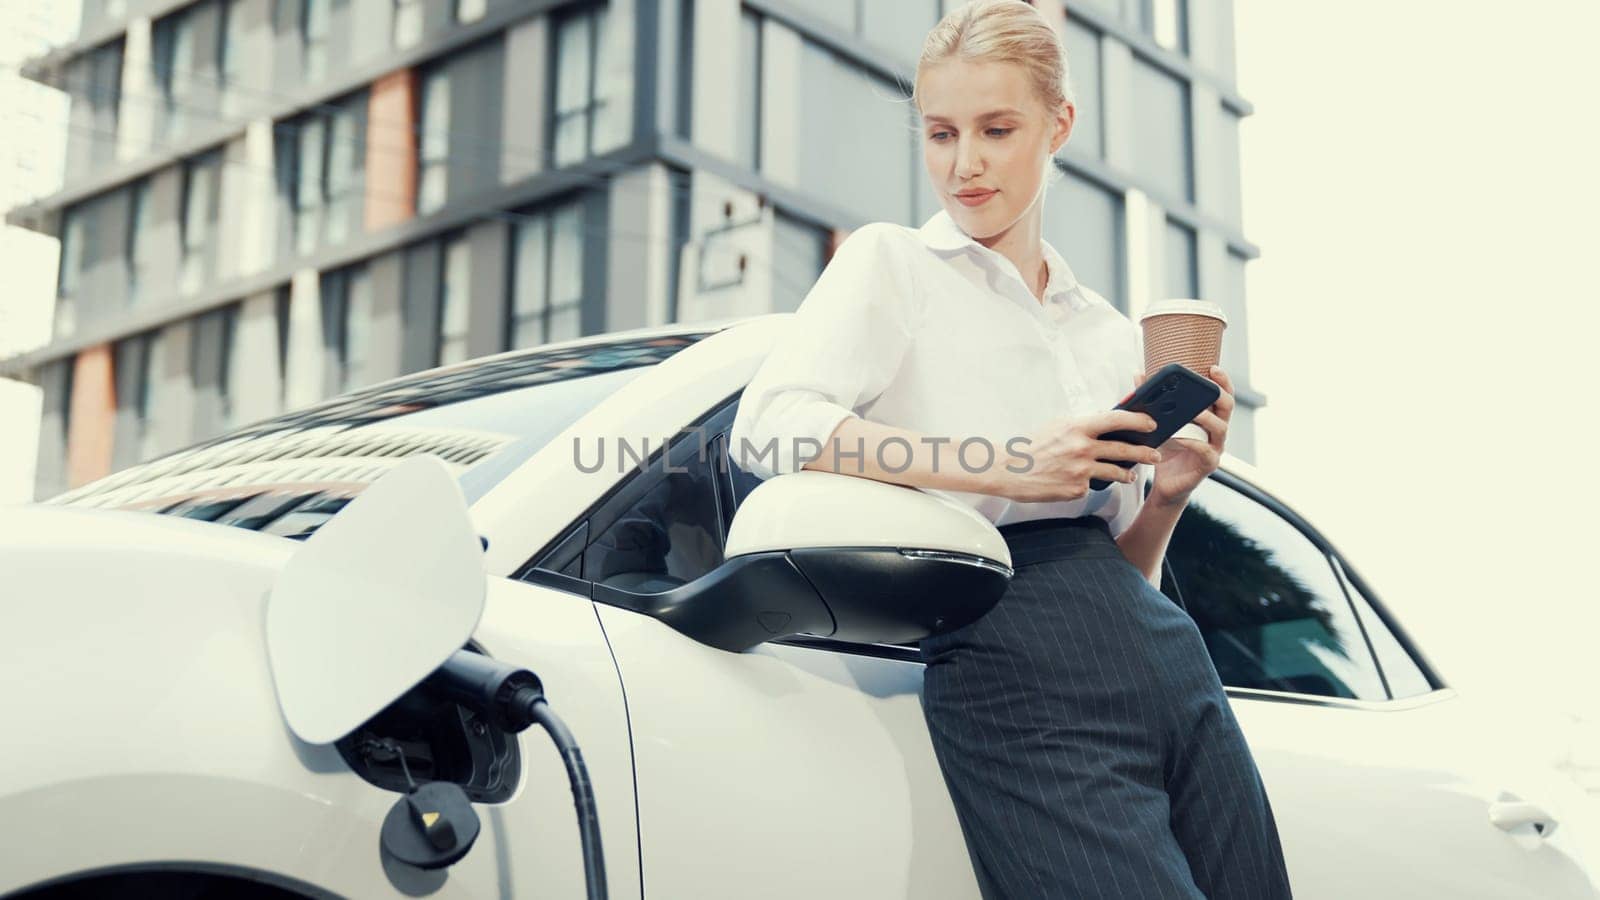 Progressive businesswoman leaning on electric car and charging station before driving around city center. Eco friendly rechargeable EV car powered by sustainable and clean energy.